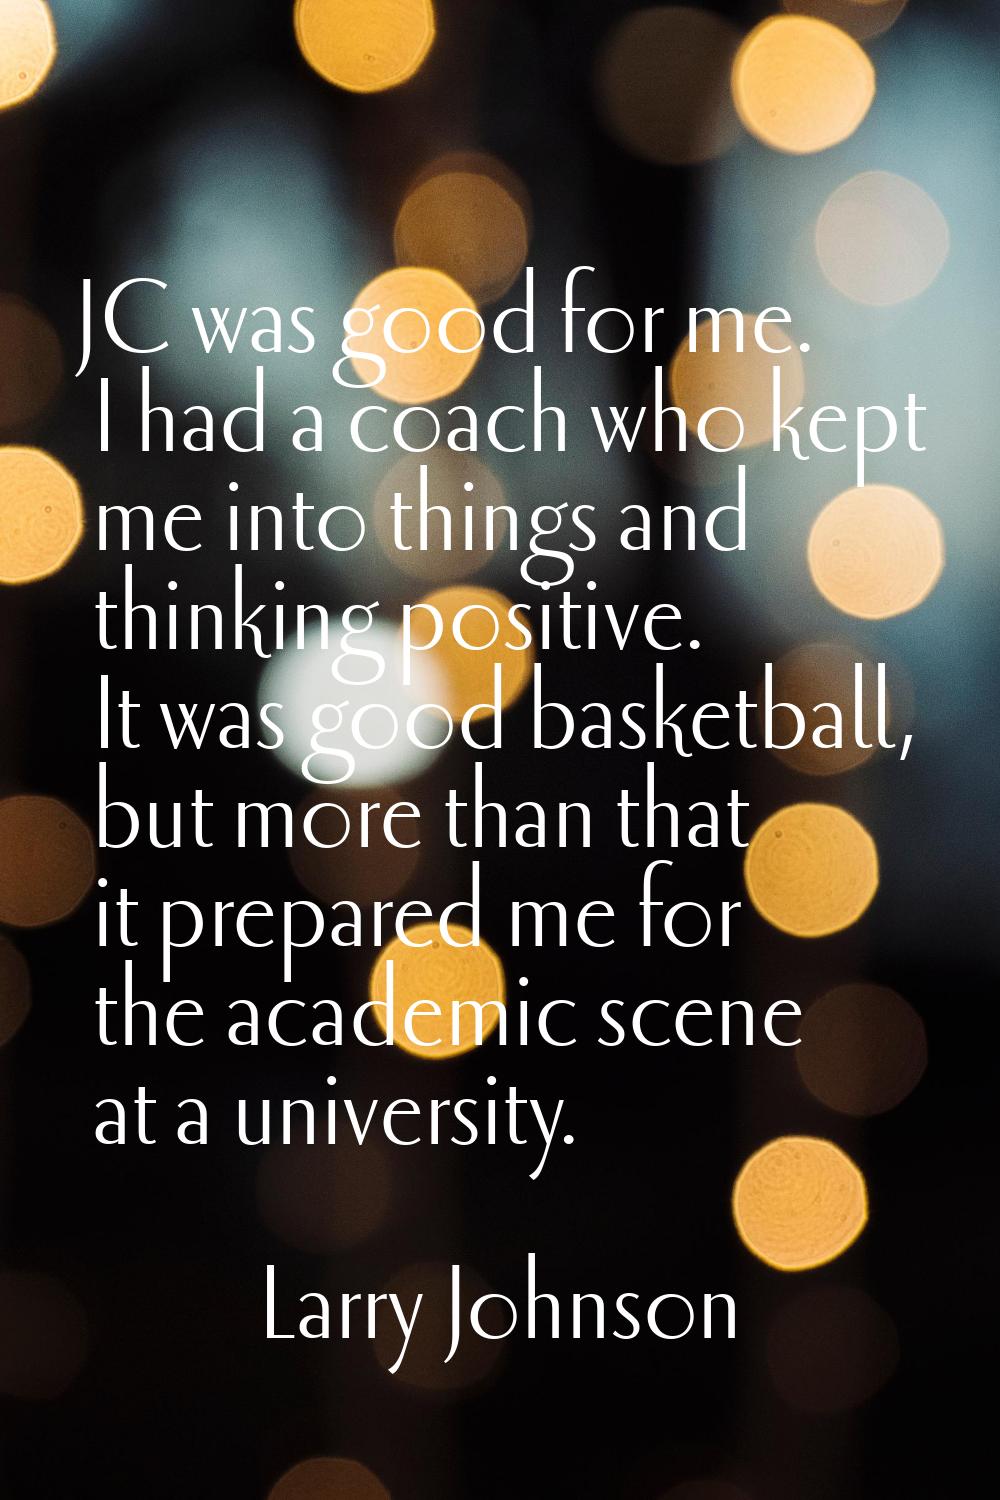 JC was good for me. I had a coach who kept me into things and thinking positive. It was good basket